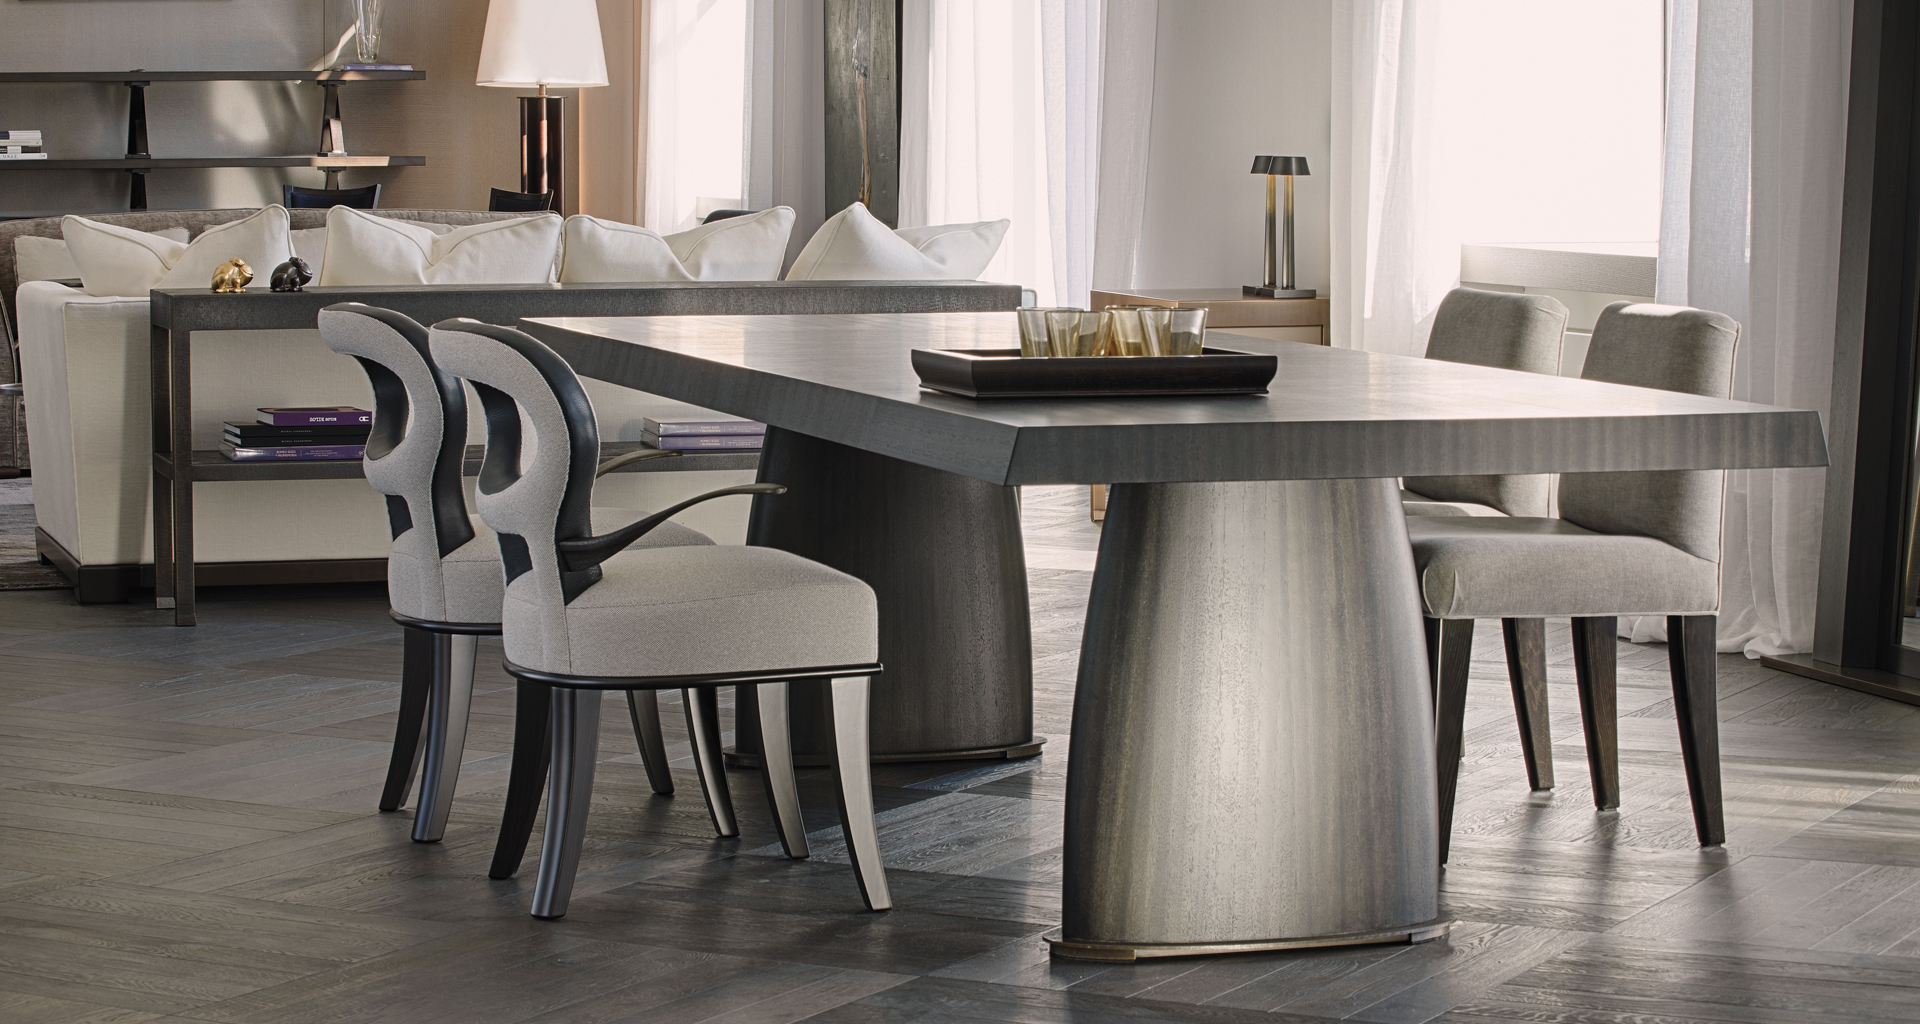 Goffredo is a wooden dining table with a bronze base and checked or striped top, from Promemoria's catalogue | Promemoria